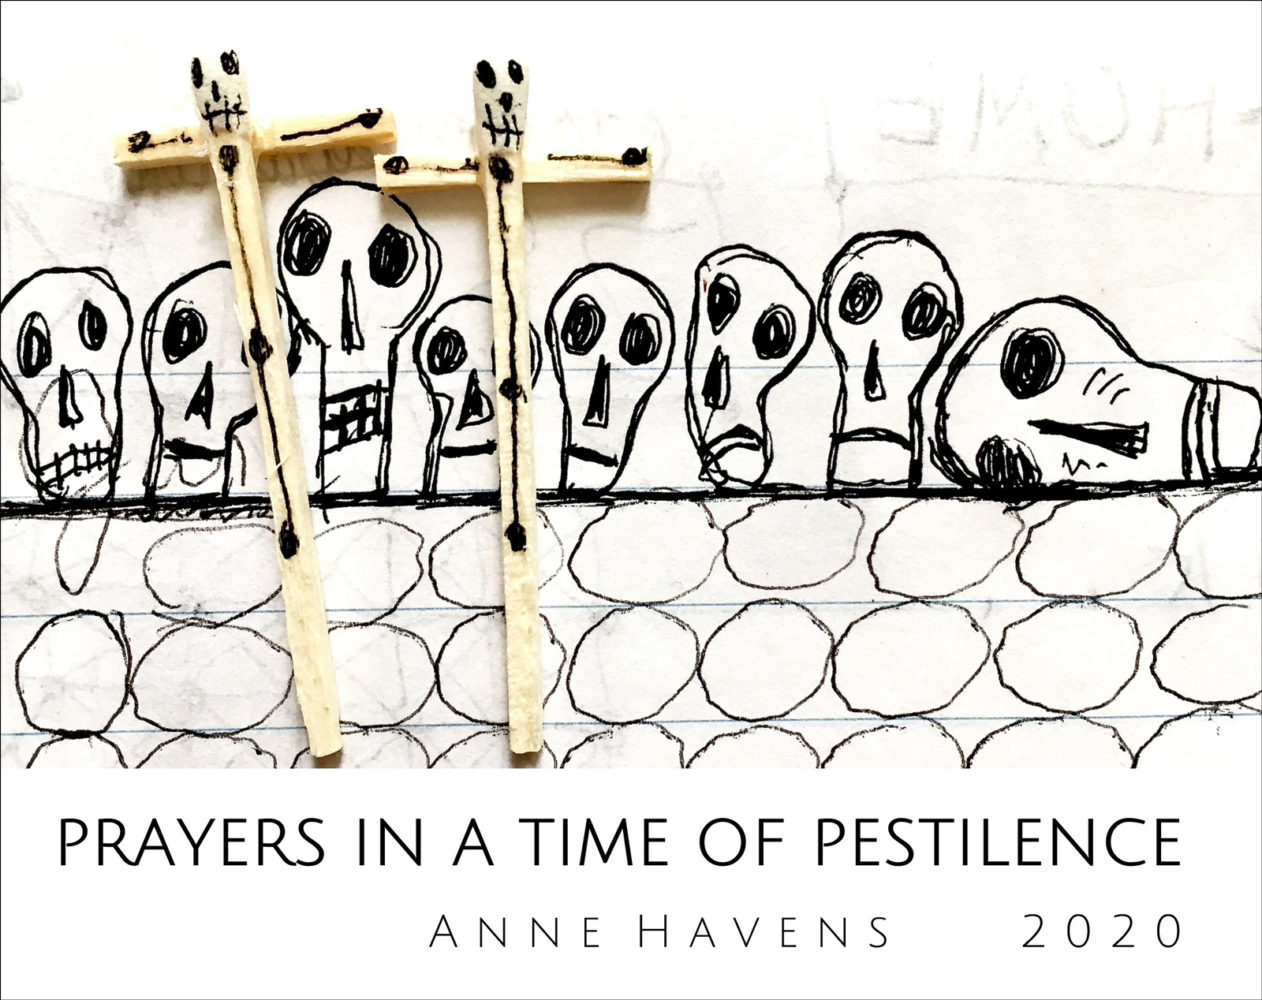 Cover of Anne Havens "Prayers in a Time of Pestilence" 2020